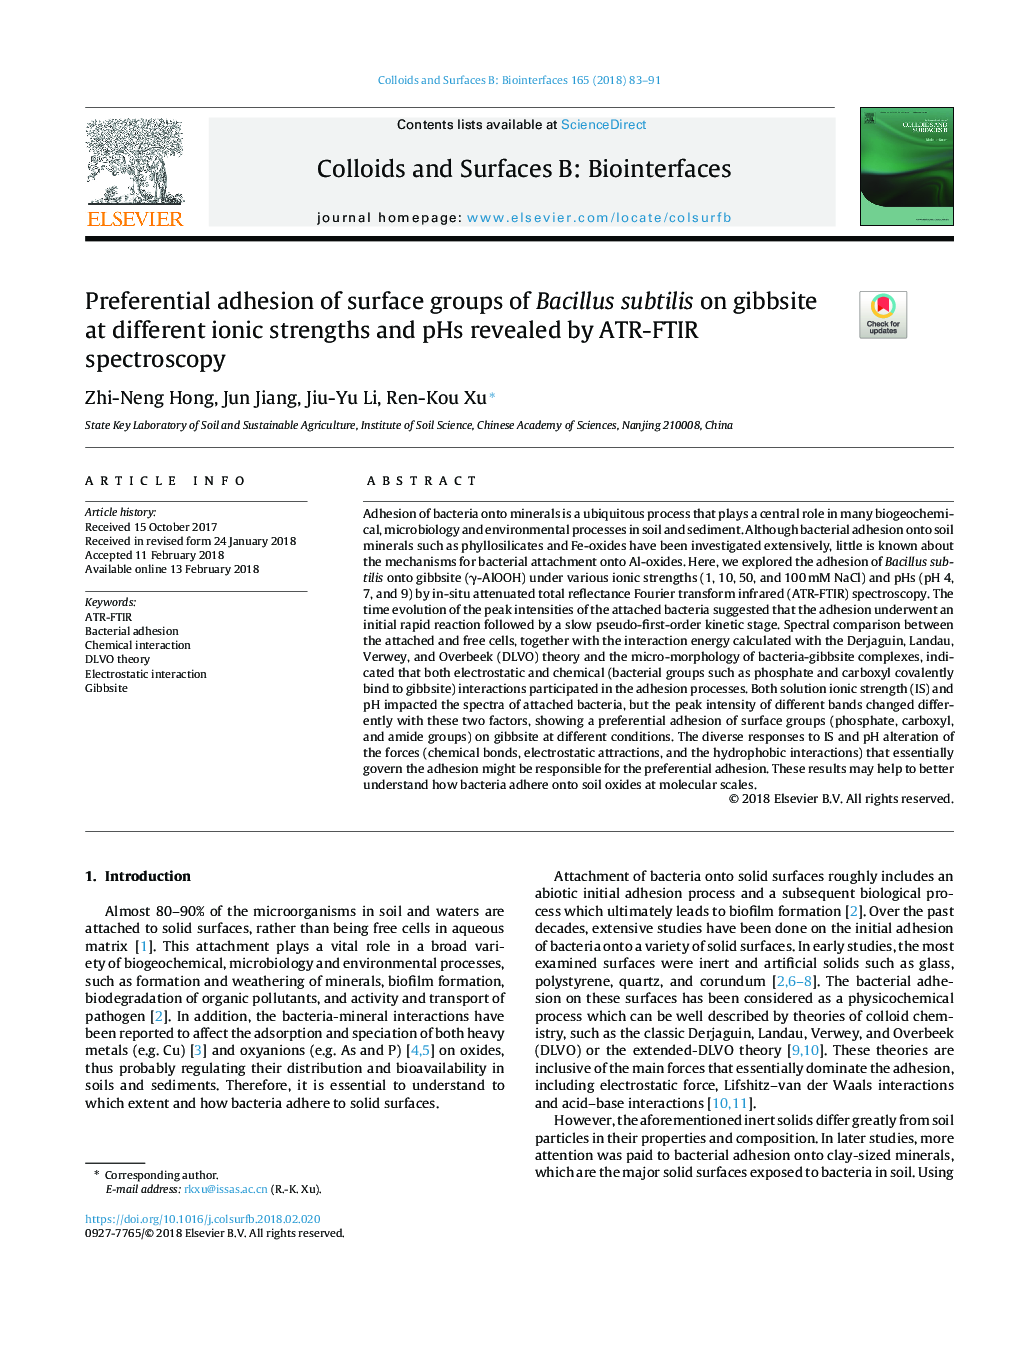 Preferential adhesion of surface groups of Bacillus subtilis on gibbsite at different ionic strengths and pHs revealed by ATR-FTIR spectroscopy